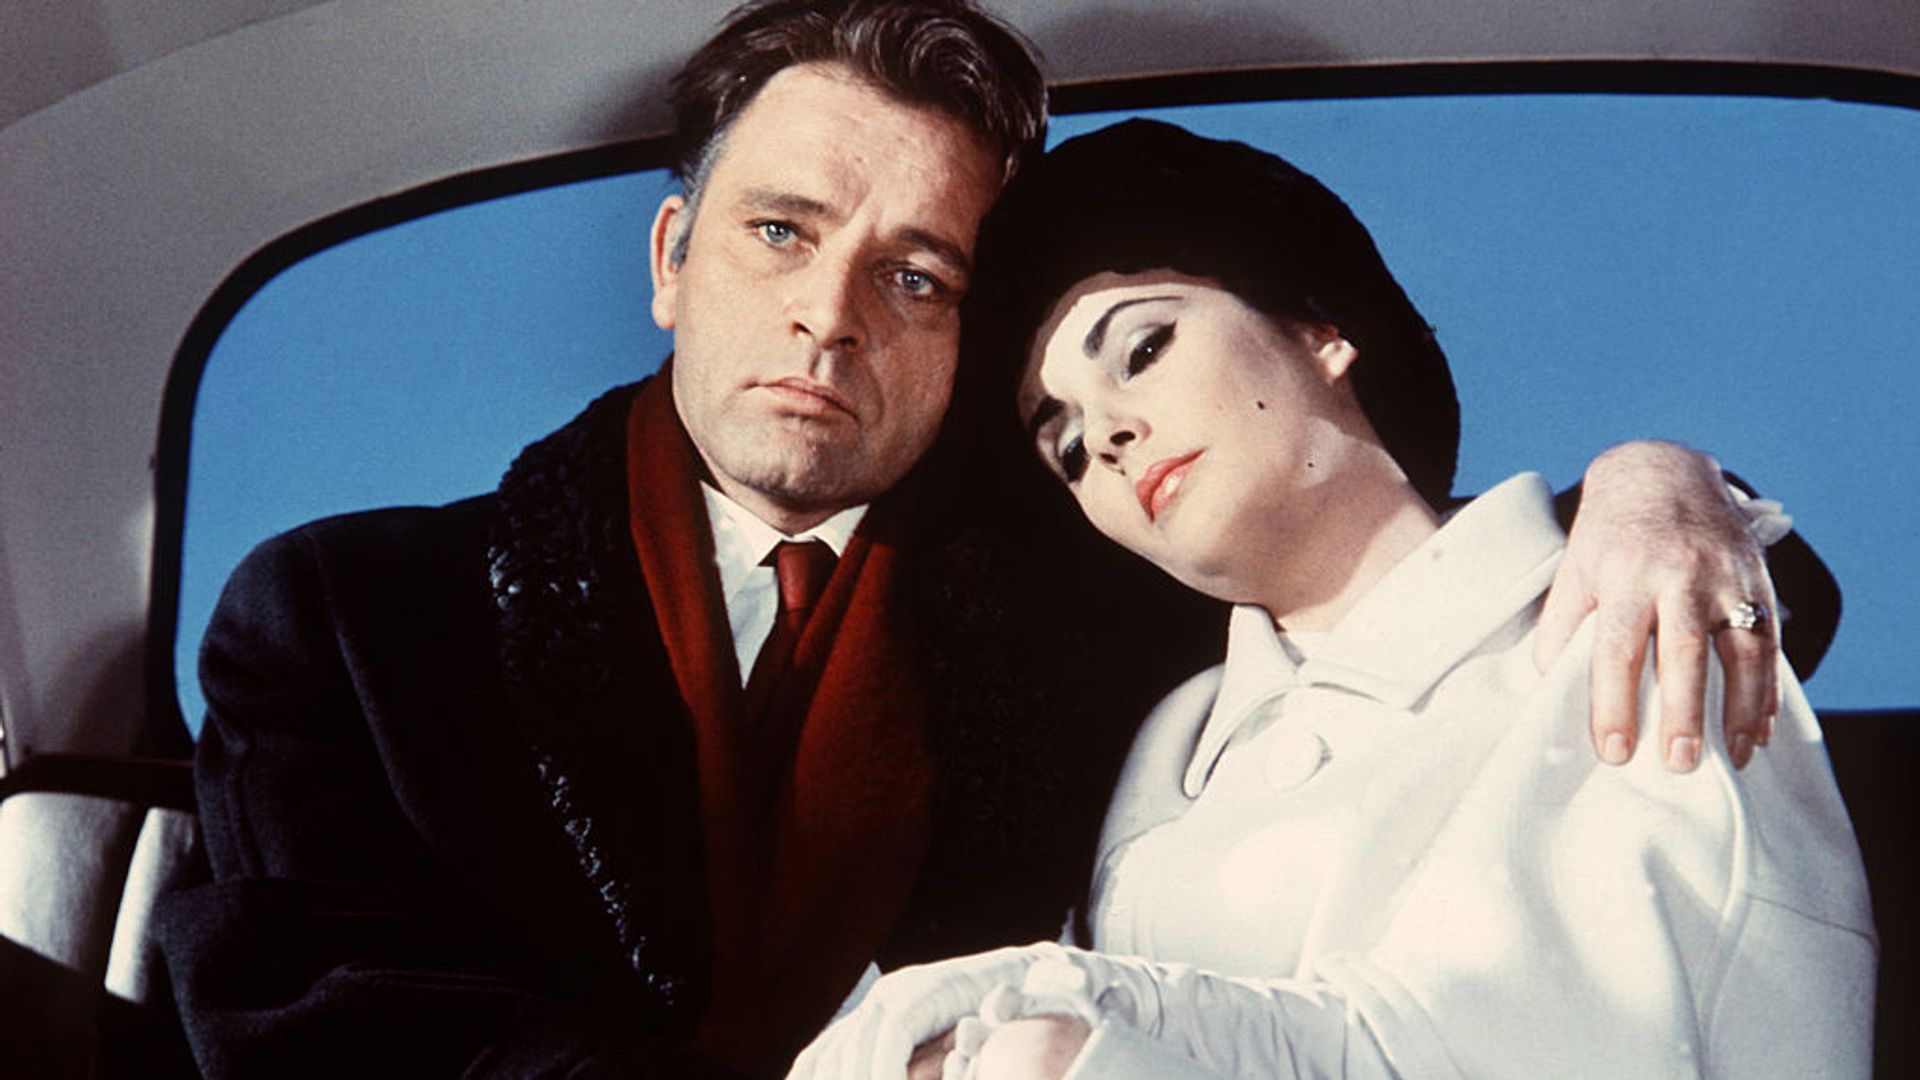 Welsh actor Richard Burton and British American actress Elizabeth Taylor on the set of The V.I.P.s, directed by Anthony Asquith